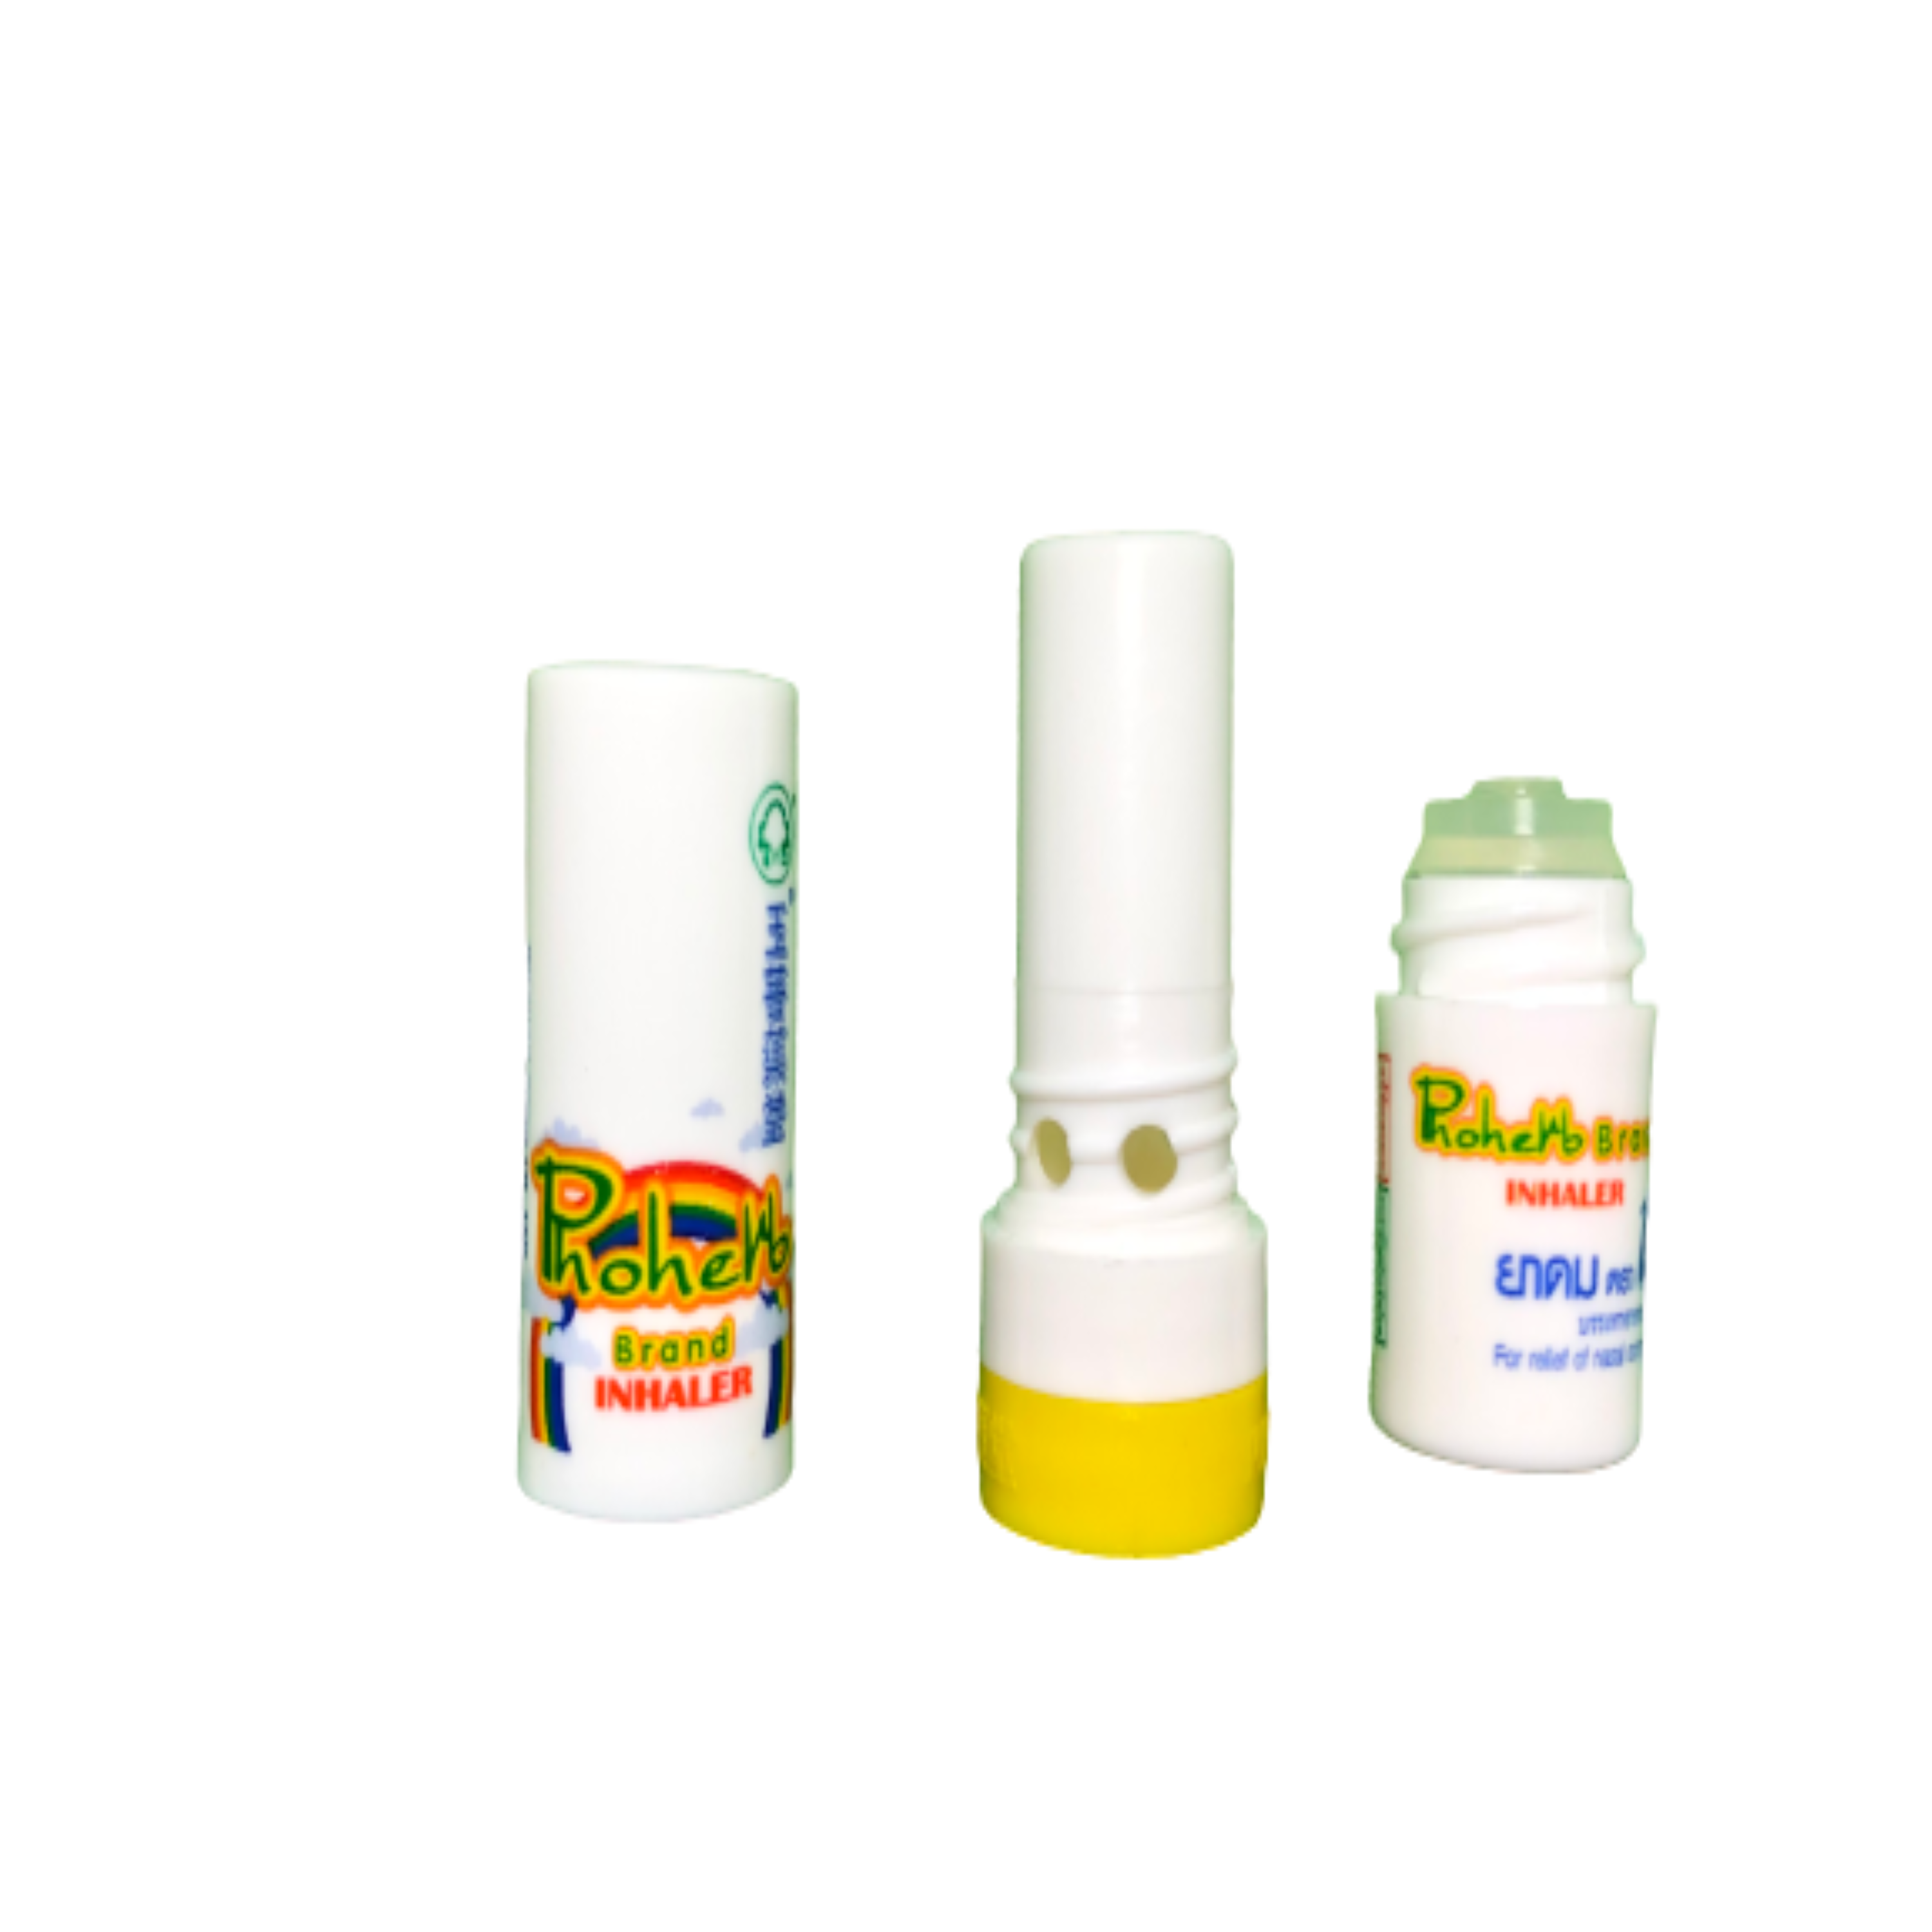 Vicks inhaler stick for nasal congestion (imported from Thailand